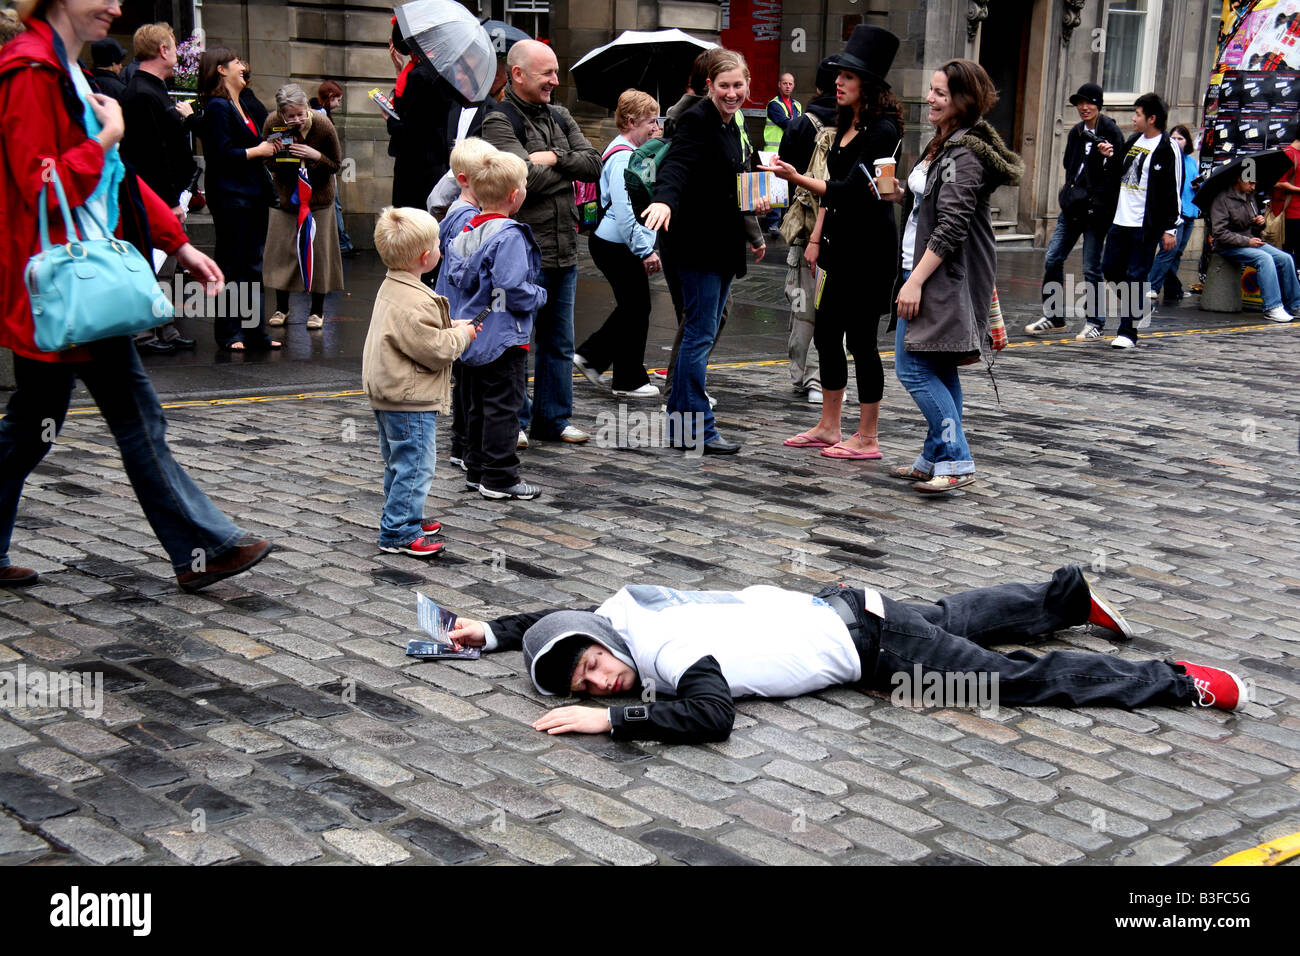 Edinburgh Fringe Festival performer plays dead in the Royal Mile to publicise show Stock Photo